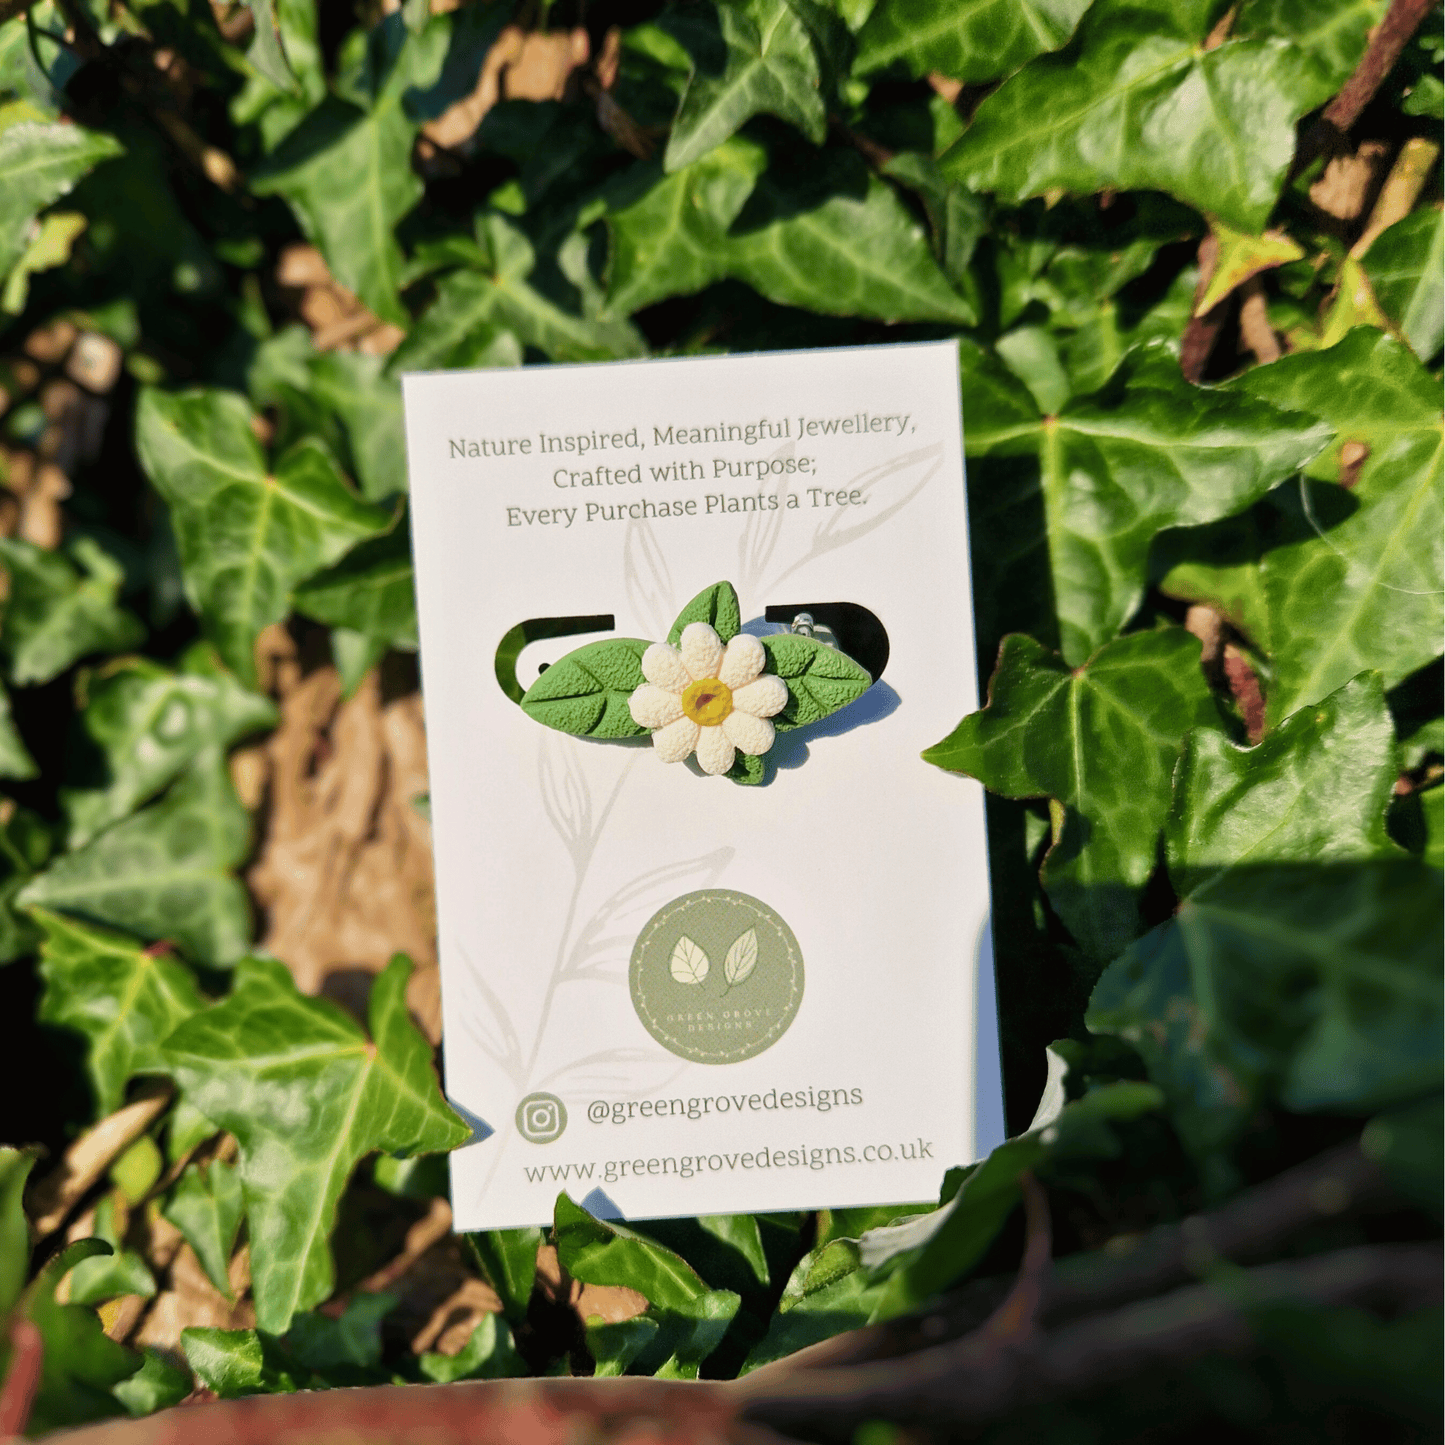 Polymer Clay Daisy and Leaf Brooch Hand Crafted in Dorset with Nature Background.